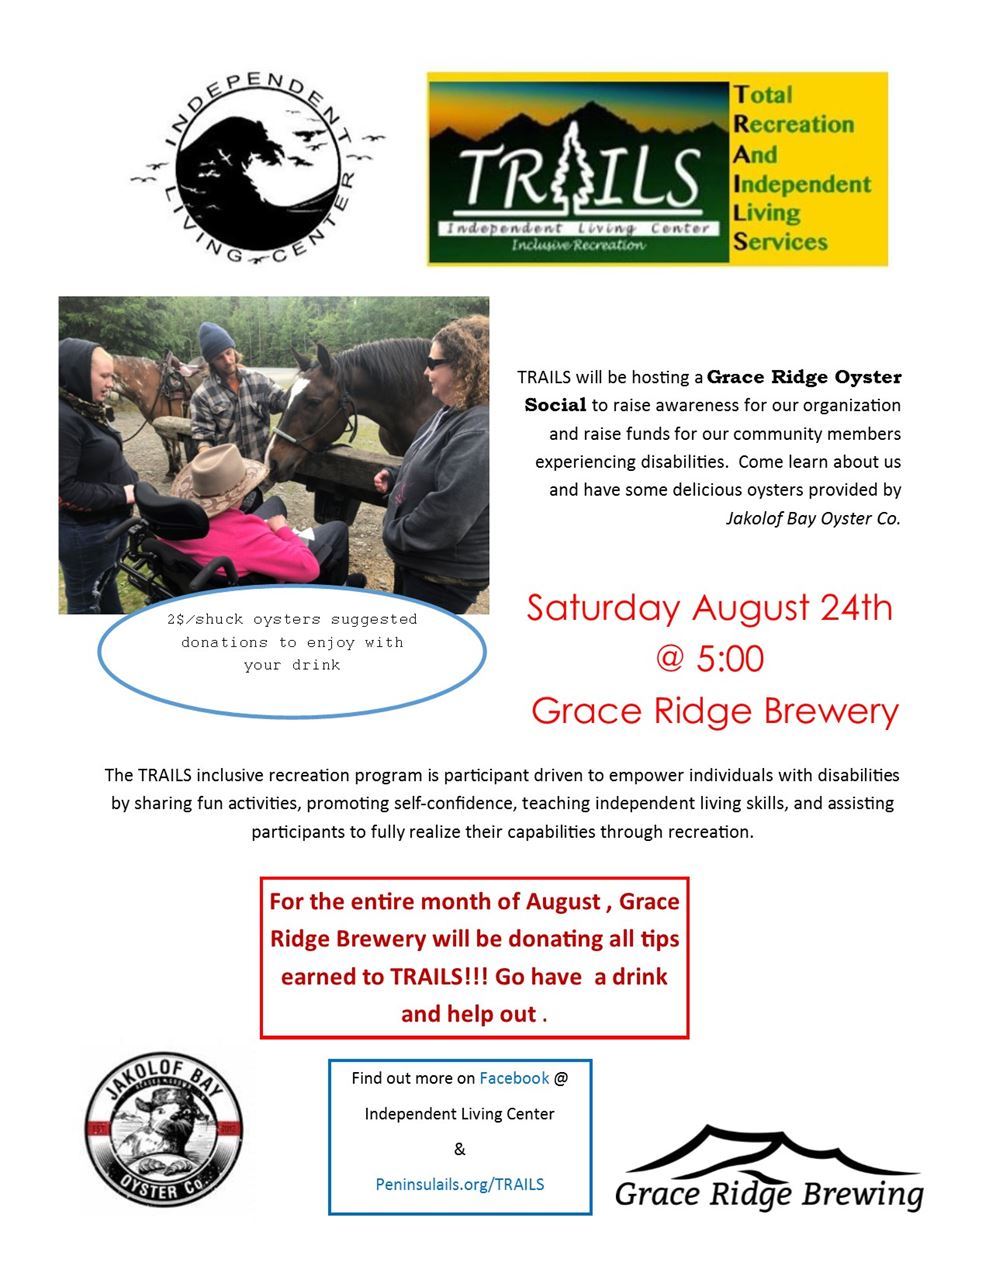 TRAILS Oyster Social At Grace Ridge Brewing Saturday August 24th at 500, August Tips at Grace Ridge Brewing support TRAILS